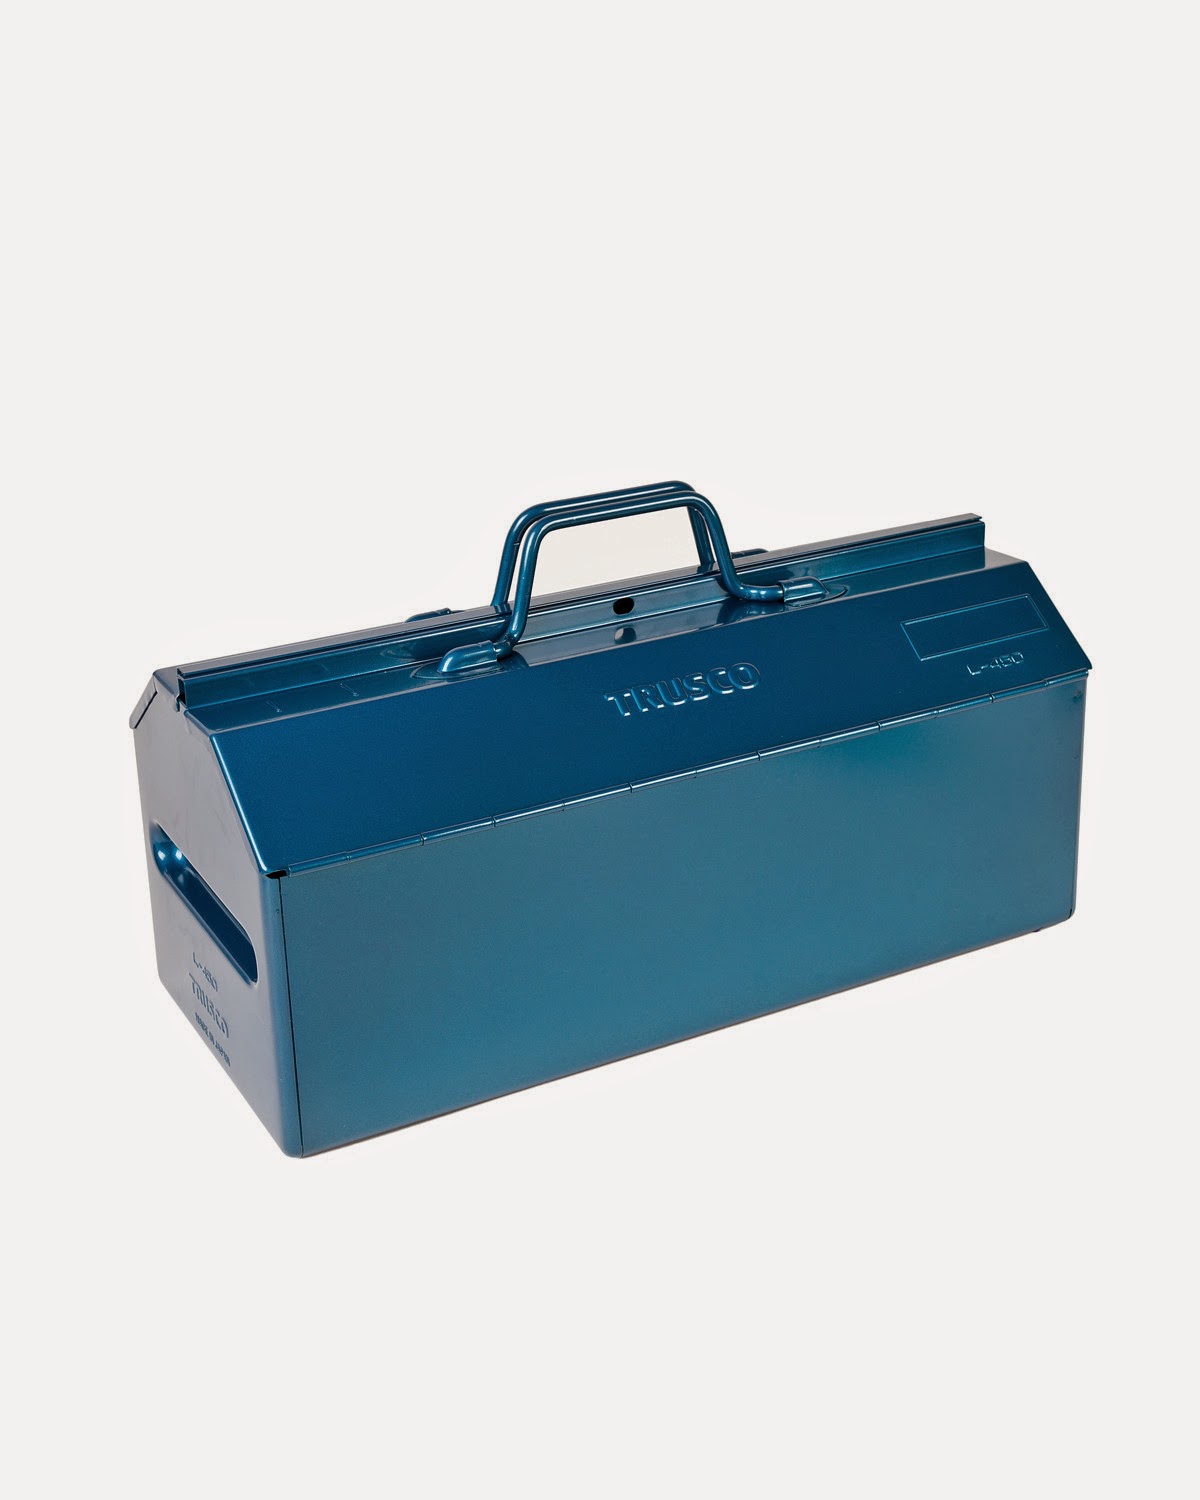 GRAY Magazine: Product of the Week: Trusco Toolboxes